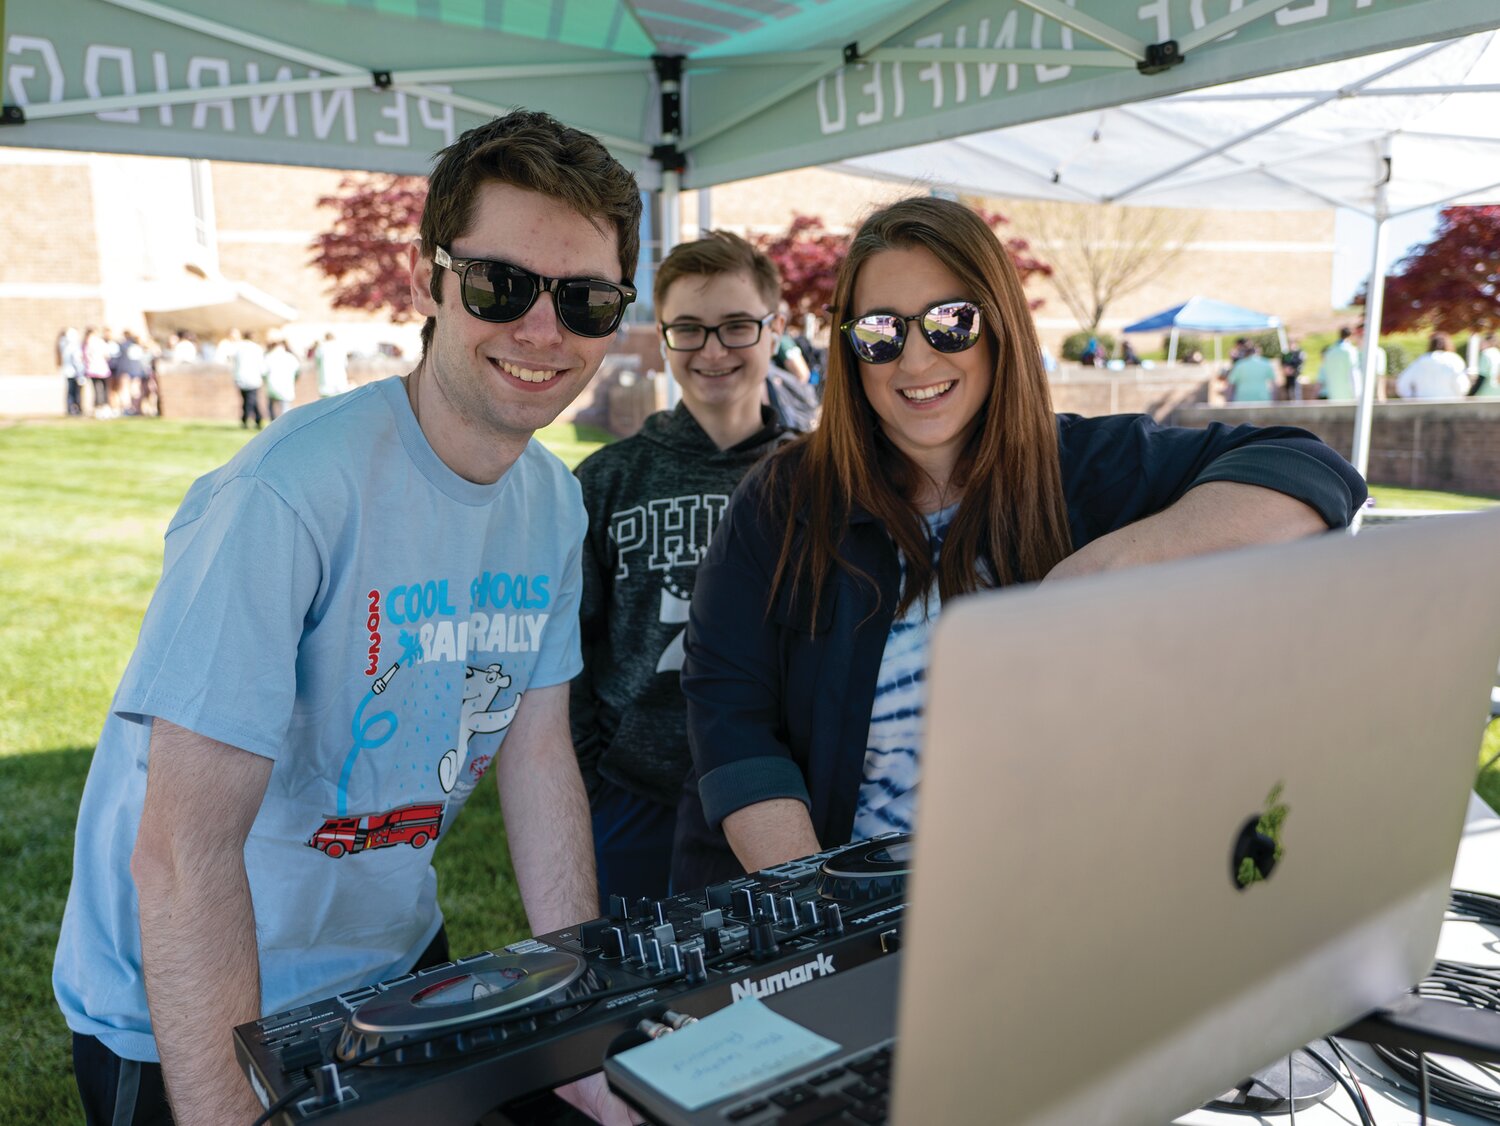 April Showers also featured a concert from Pennridge High School Rock bands, a DJ and additional entertainment.